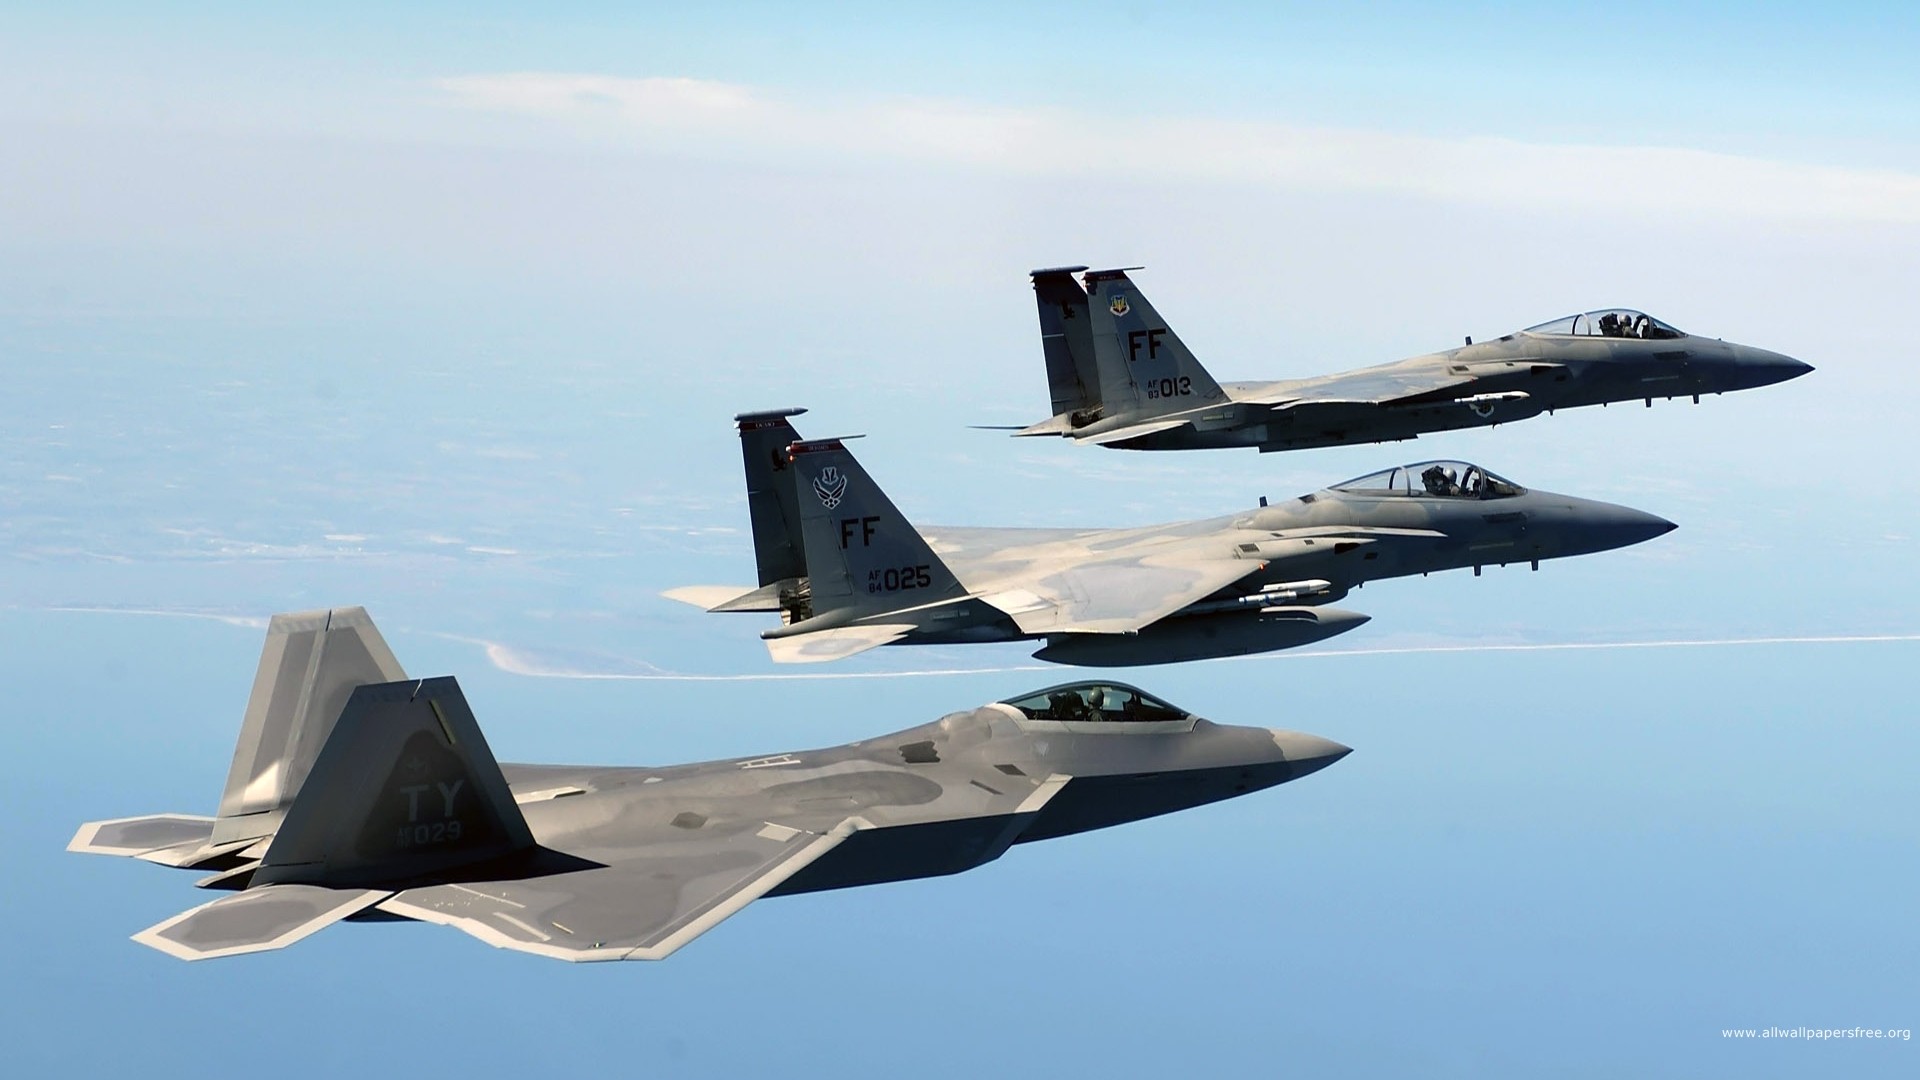 Military Aircraft Airplane Sky Jets F22 Raptor F 15 Eagle Military Aircraft 1920x1080